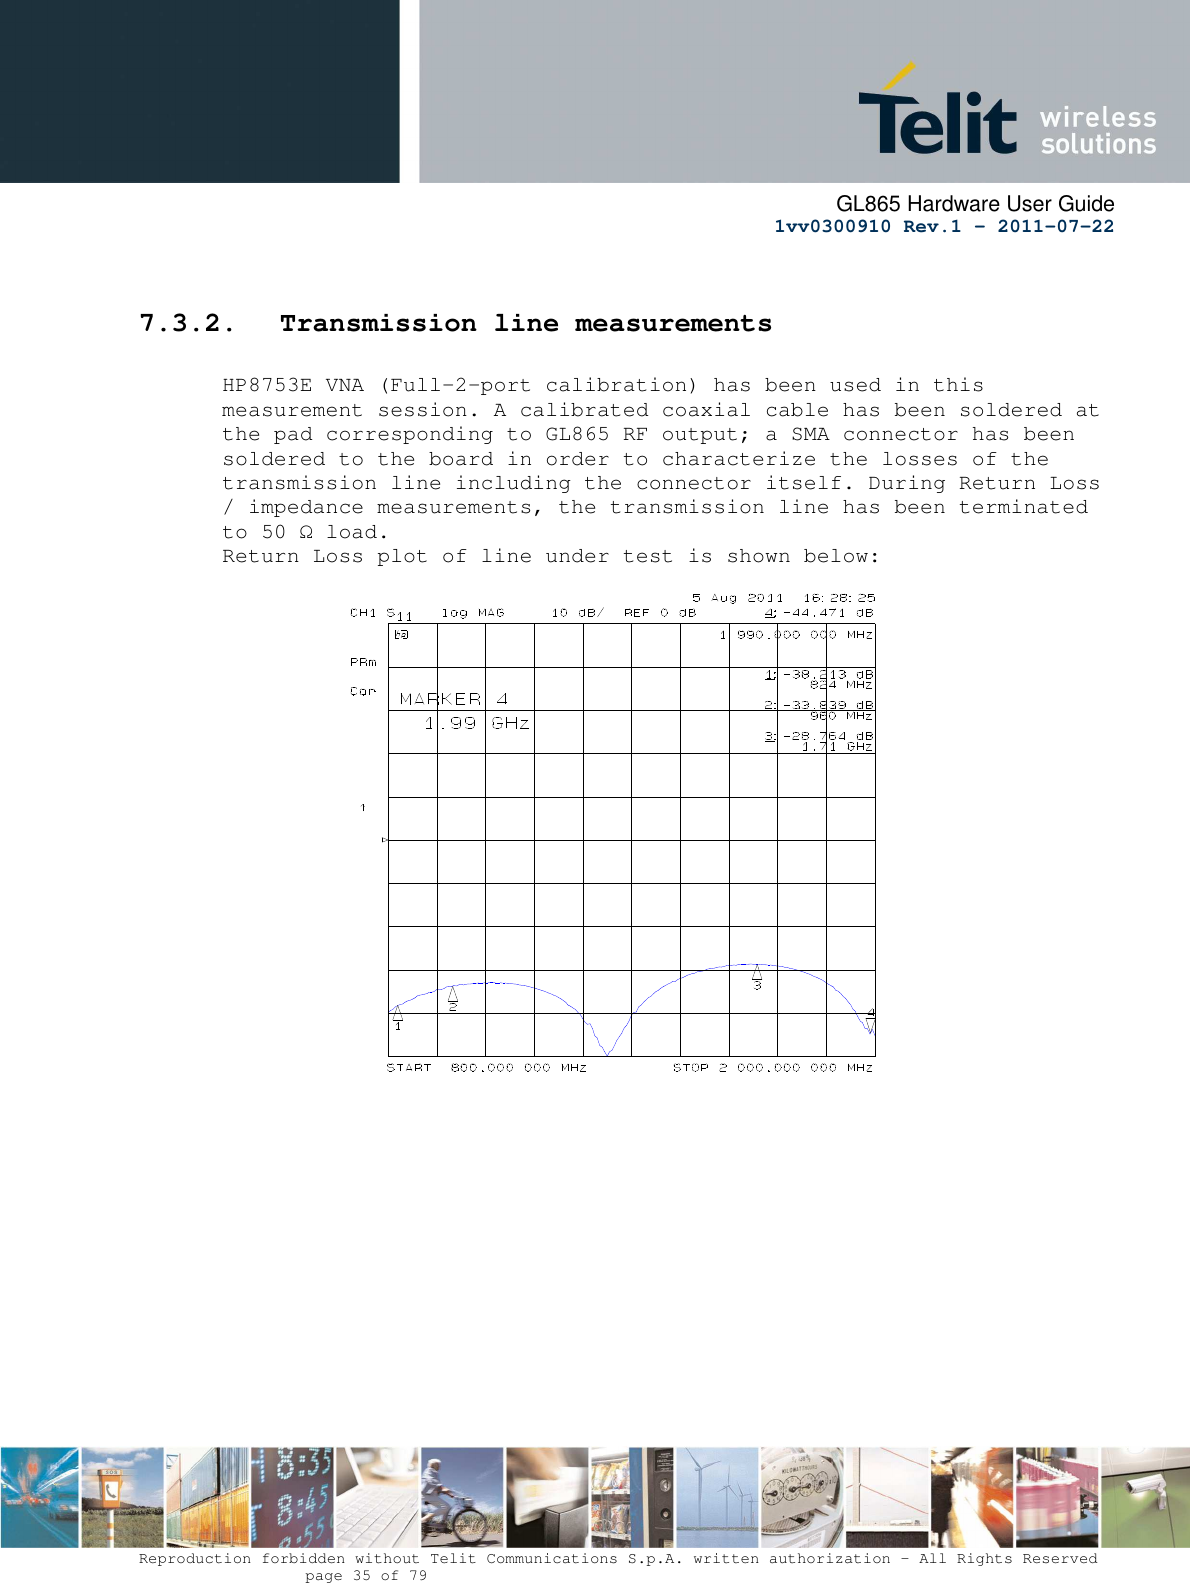      GL865 Hardware User Guide     1vv0300910 Rev.1 – 2011-07-22       Reproduction forbidden without Telit Communications S.p.A. written authorization - All Rights Reserved    page 35 of 79   7.3.2. Transmission line measurements  HP8753E VNA (Full-2-port calibration) has been used in this measurement session. A calibrated coaxial cable has been soldered at the pad corresponding to GL865 RF output; a SMA connector has been soldered to the board in order to characterize the losses of the transmission line including the connector itself. During Return Loss / impedance measurements, the transmission line has been terminated to 50 Ω load. Return Loss plot of line under test is shown below:                                     